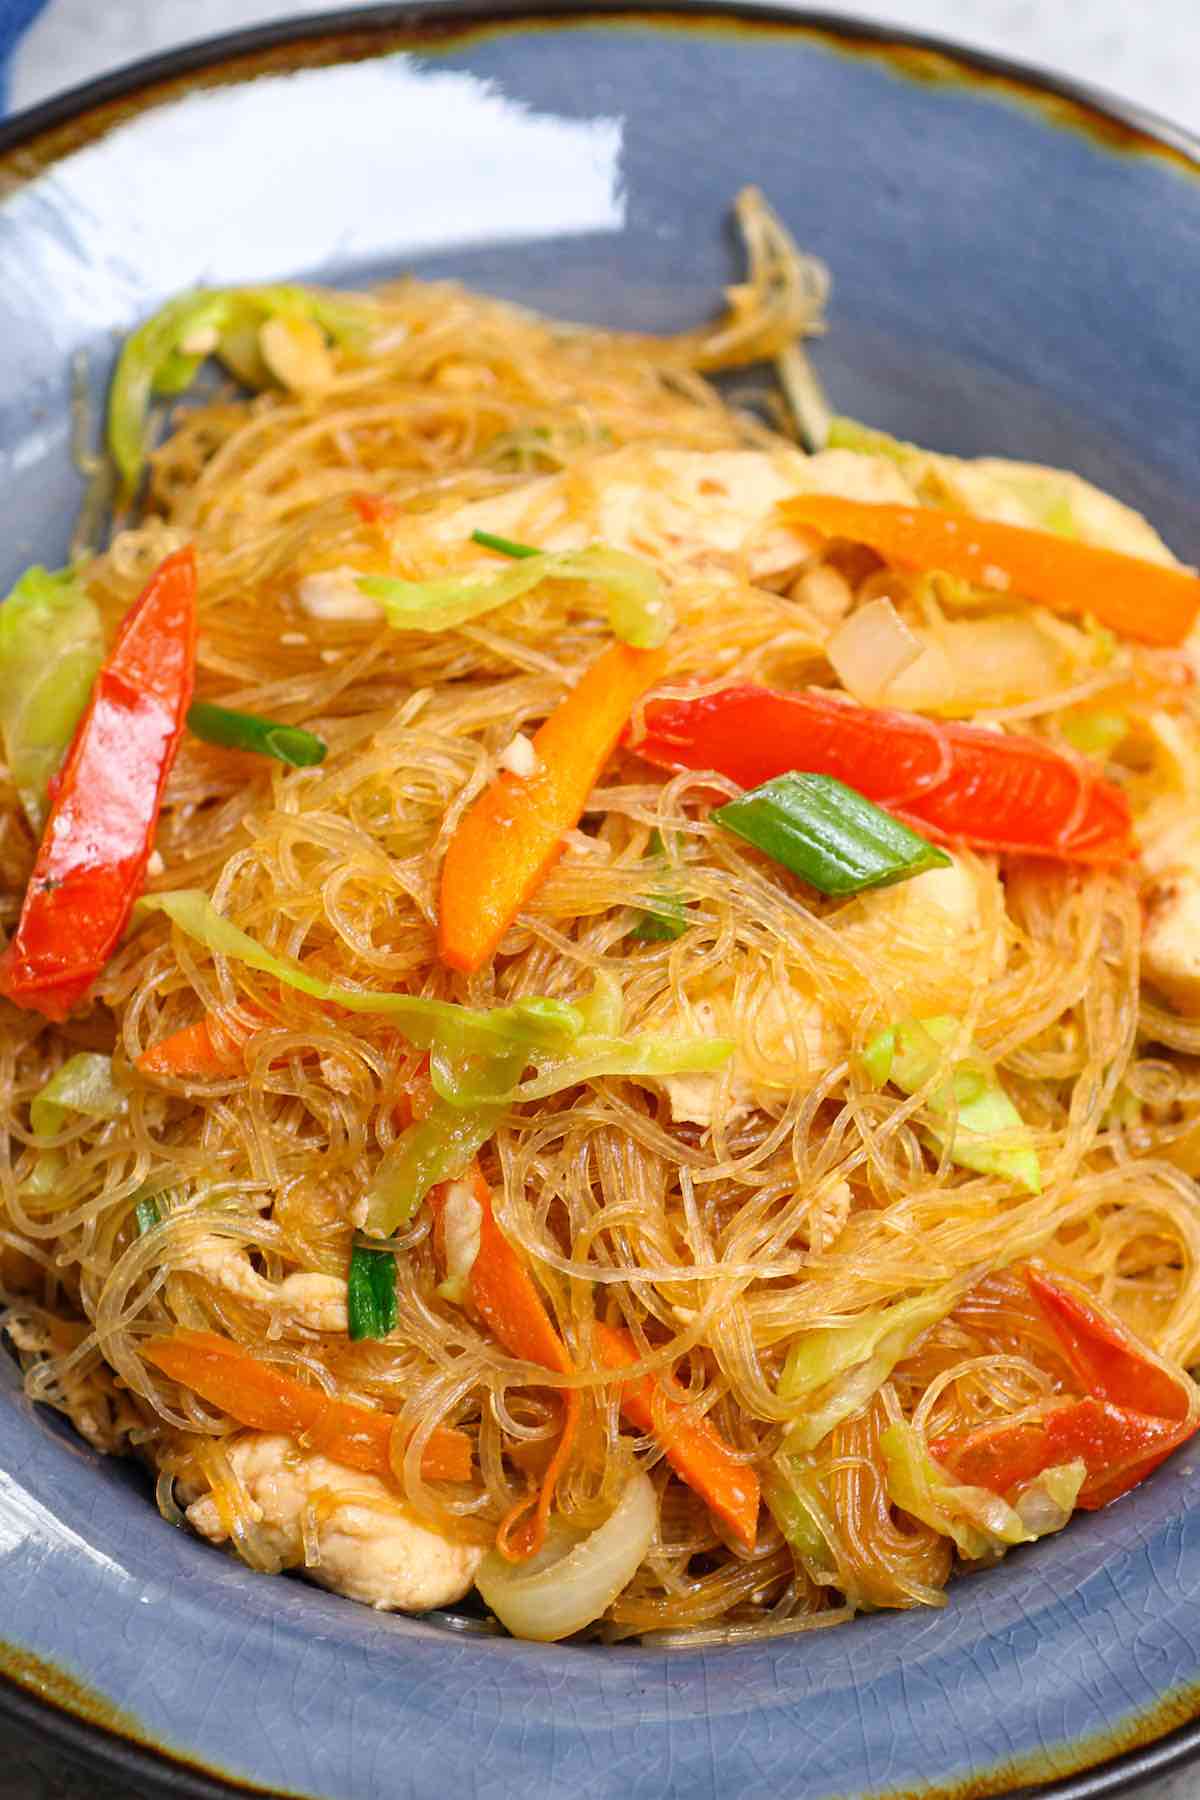 This amazing Pad Woon Sen recipe is surprisingly easy to make at home in under 30 minutes. It’s a Thai stir fried noodle dish made with glass noodles, proteins, veggies tossed in a savory and slightly sweet pad woon sen sauce.  It tastes like it came from your favorite Thai restaurant. #PadWoonSen #PadWoonSenRecipe #PadThaiWoonSen